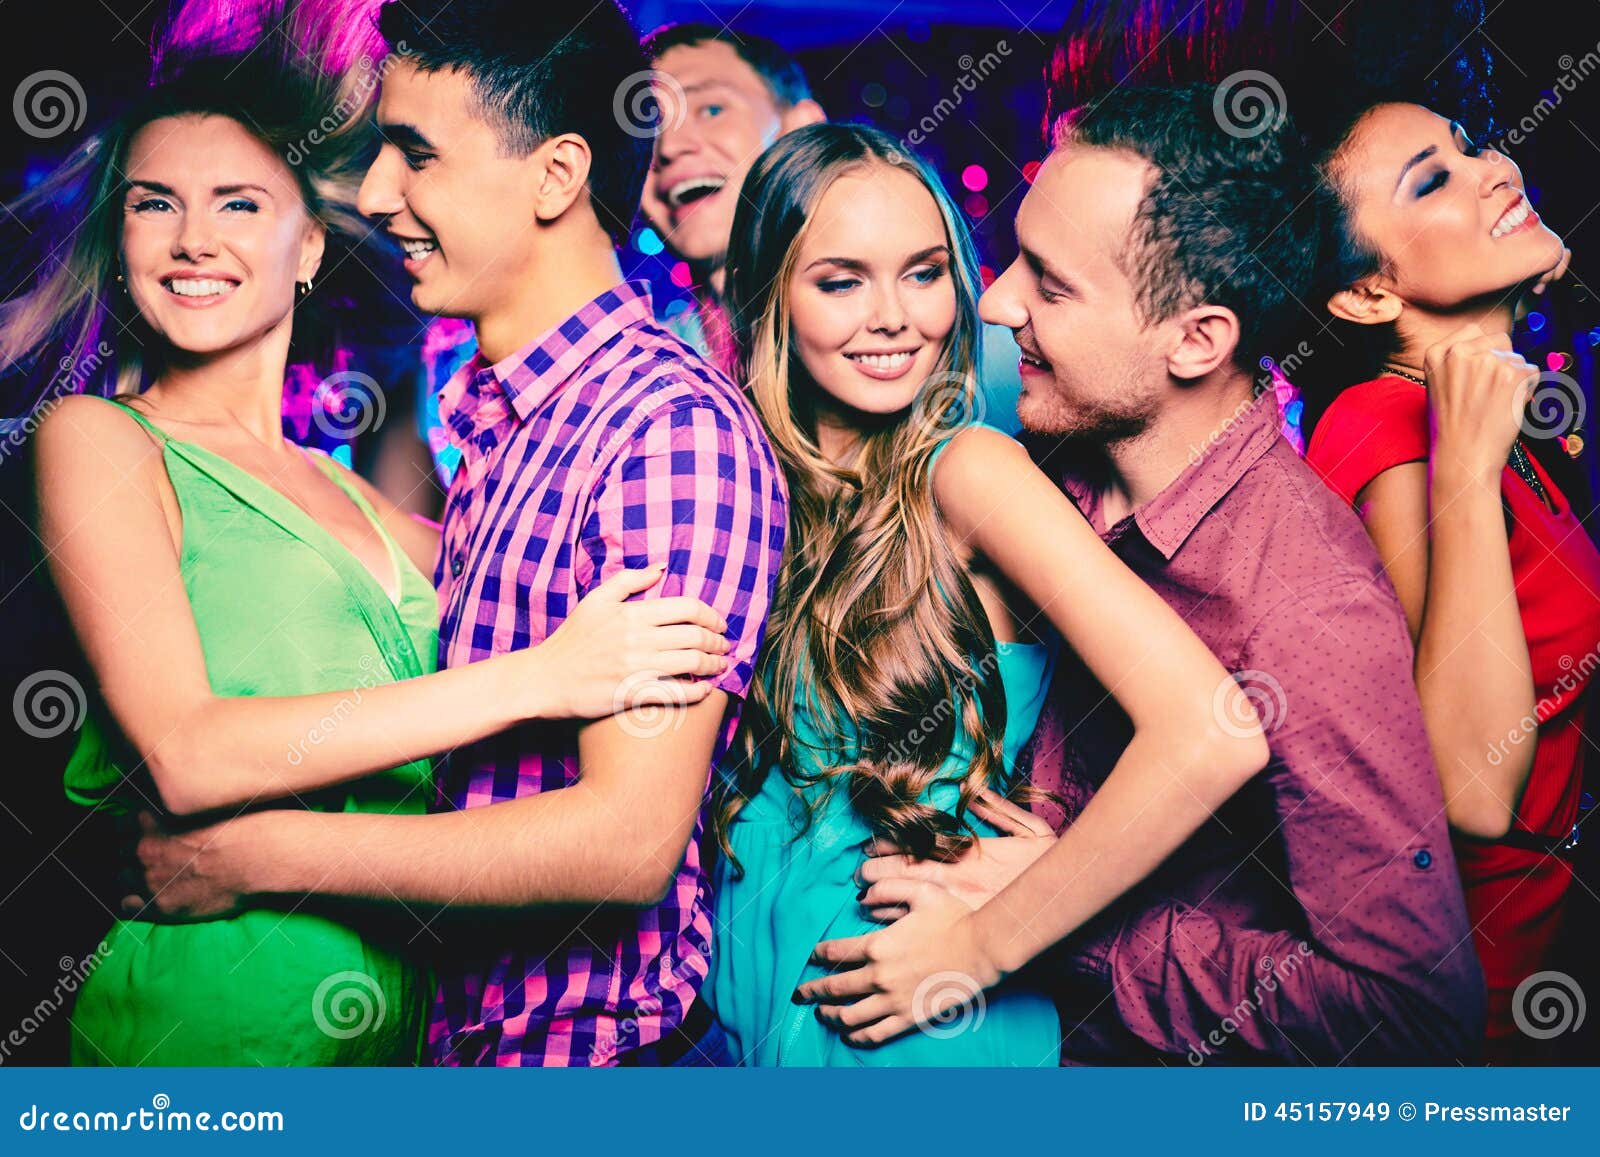 Friends clubbing stock image. Image of fashionable, couple - 45157949